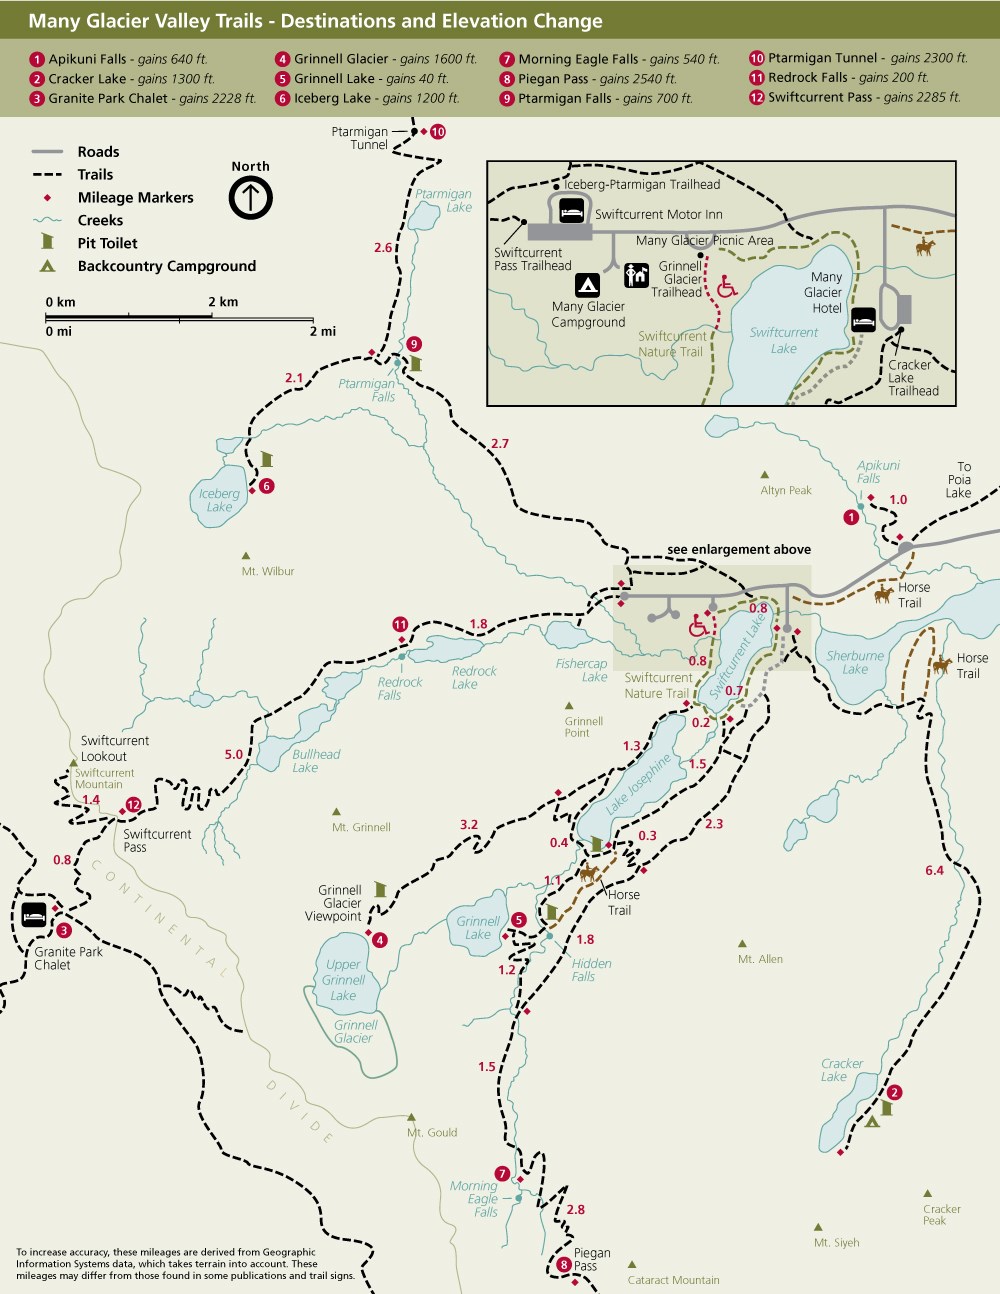 Map with labels and trails marked as dotted lines